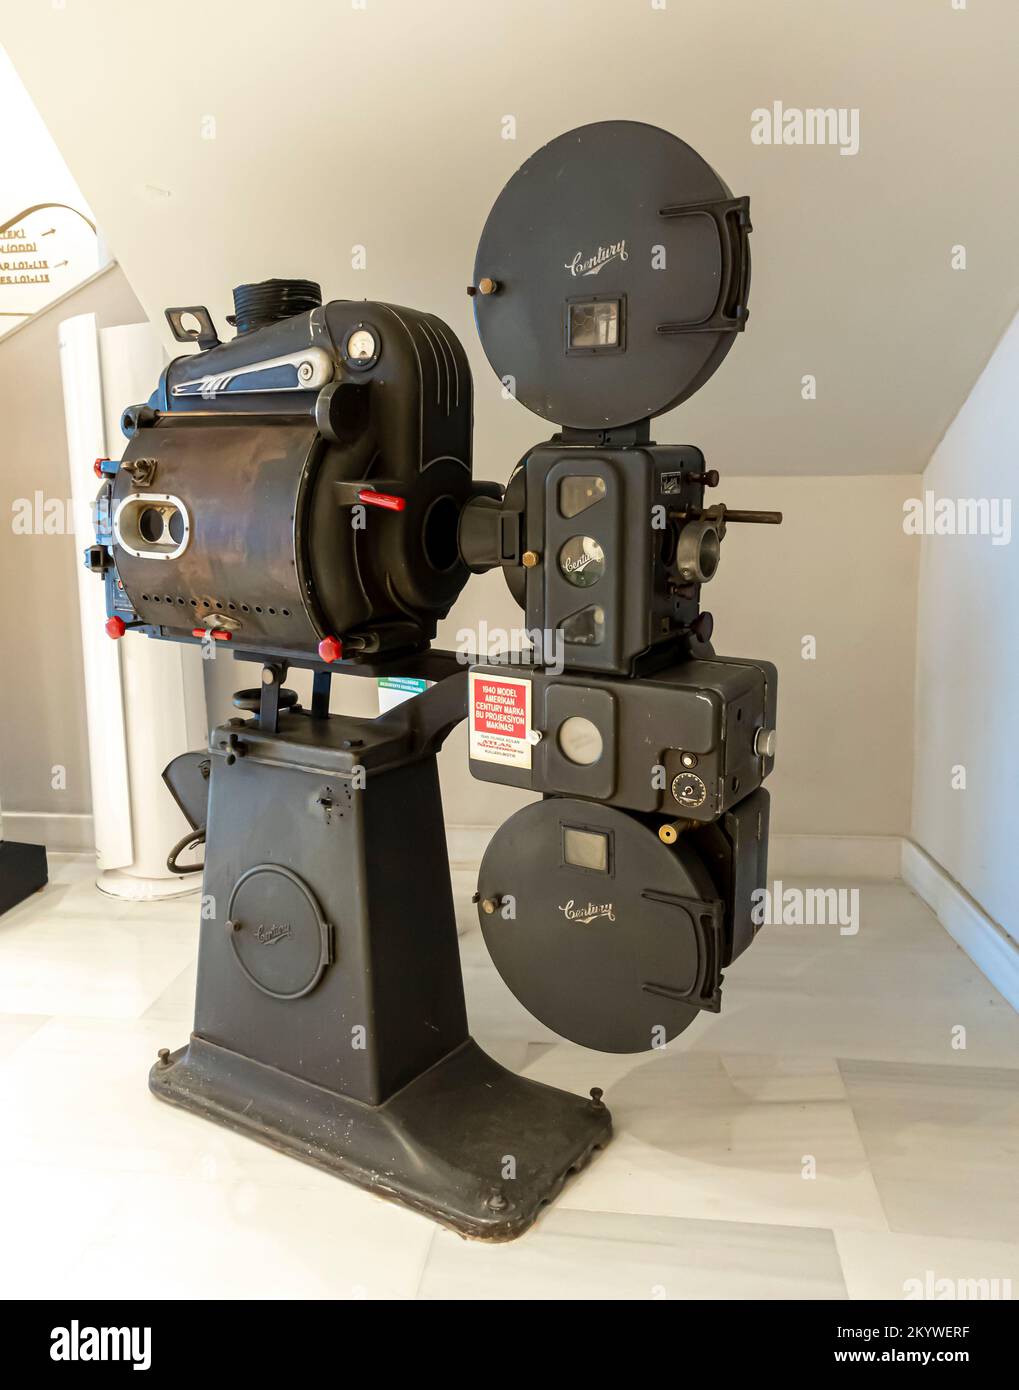 https://c8.alamy.com/comp/2KYWERF/old-vintage-35-mm-film-projector-made-in-1940-by-century-the-united-states-on-display-in-atlas-cinema-museum-istanbul-turkey-2KYWERF.jpg